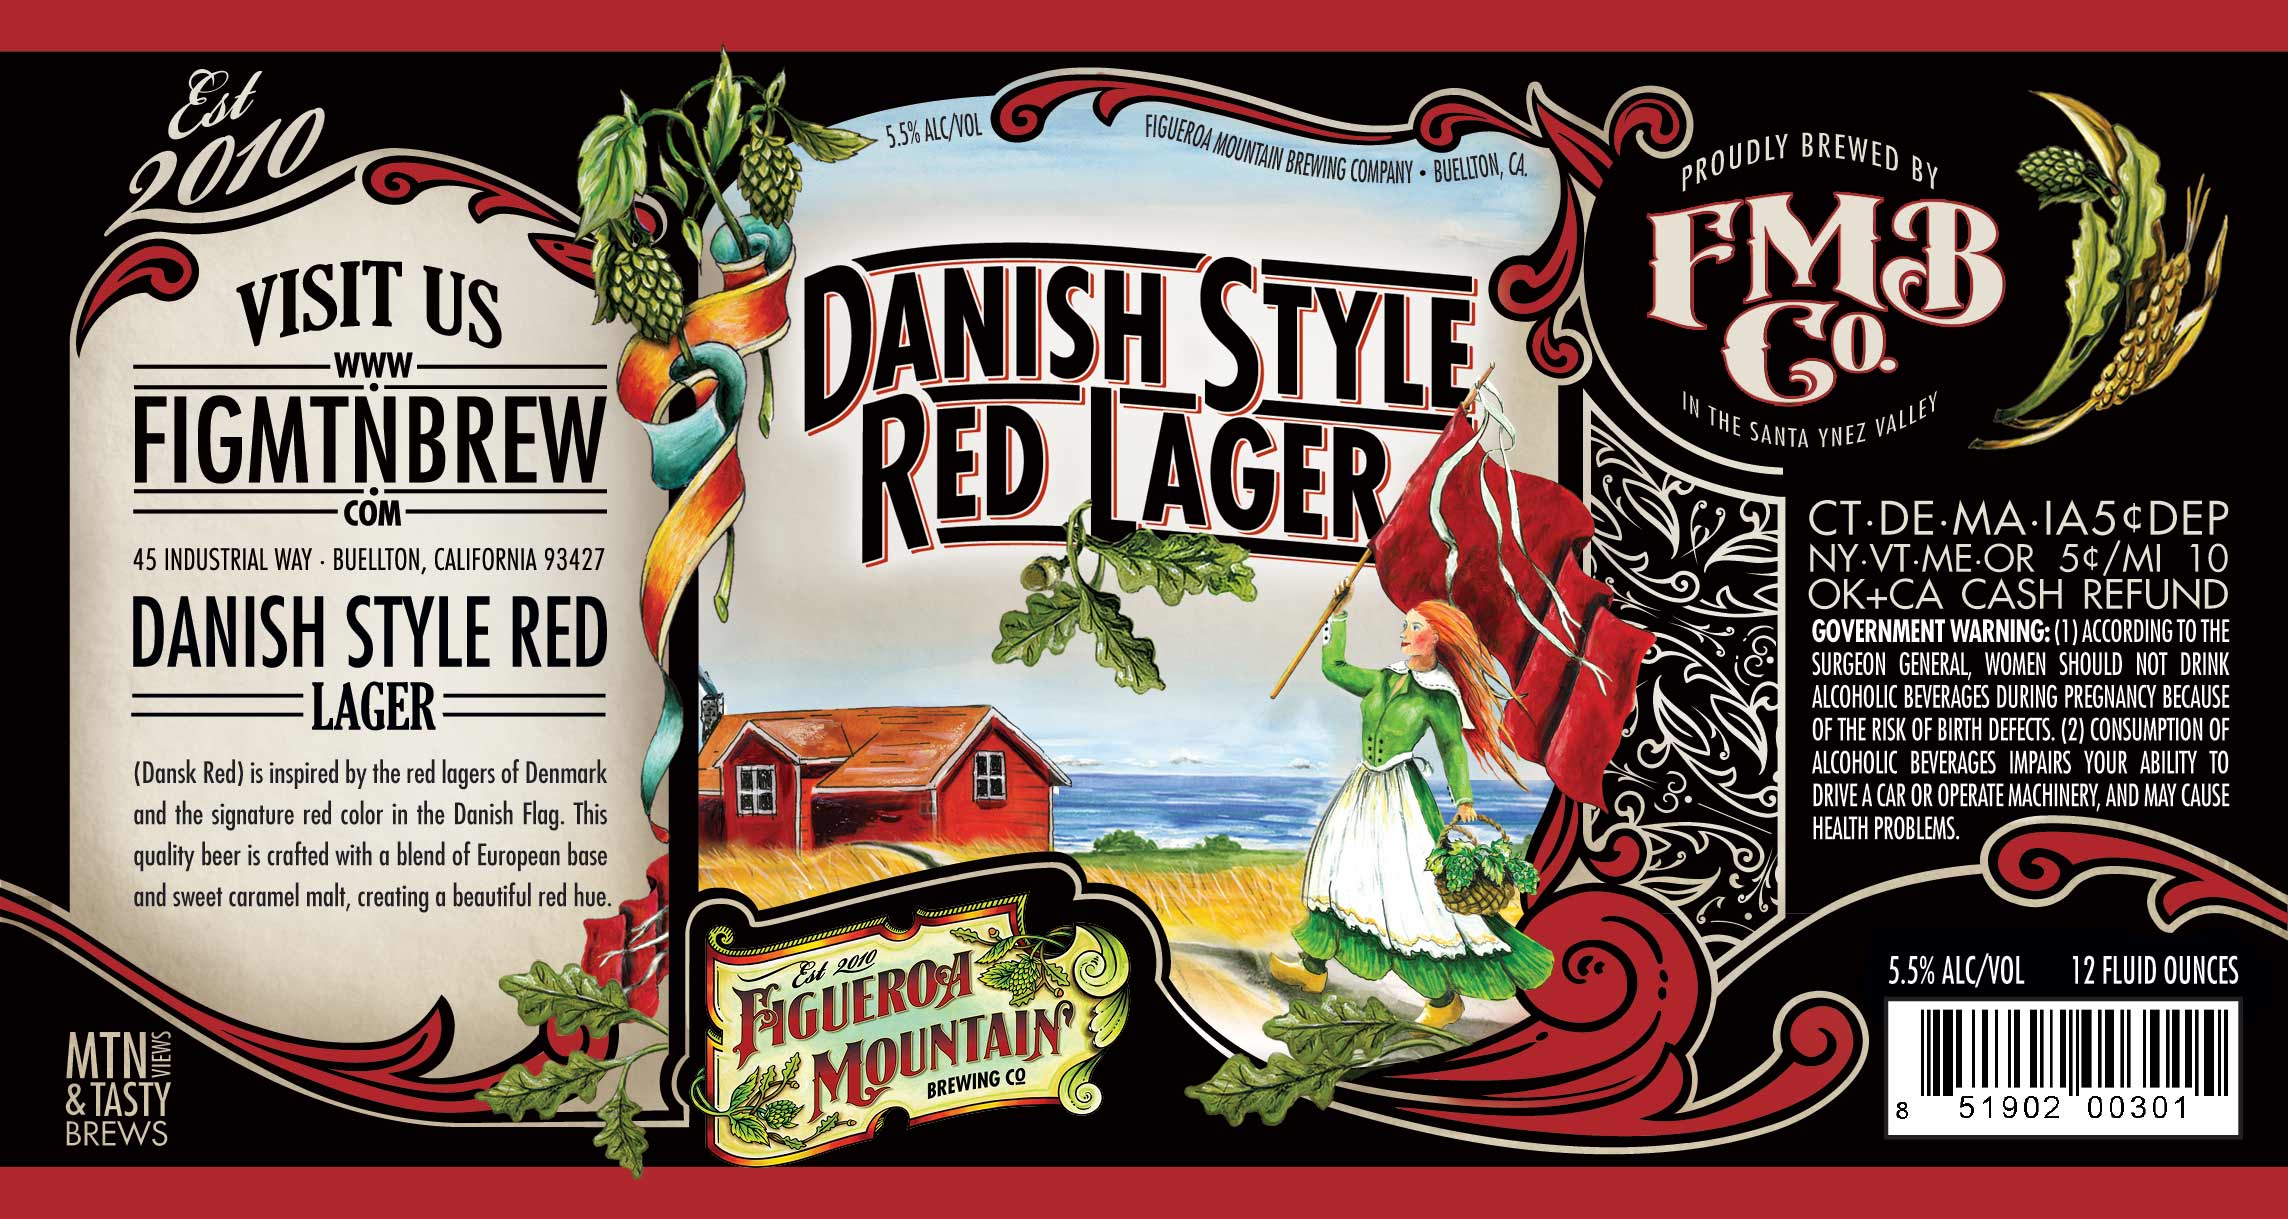 Figeroa Mountain Danish Style Red Lager